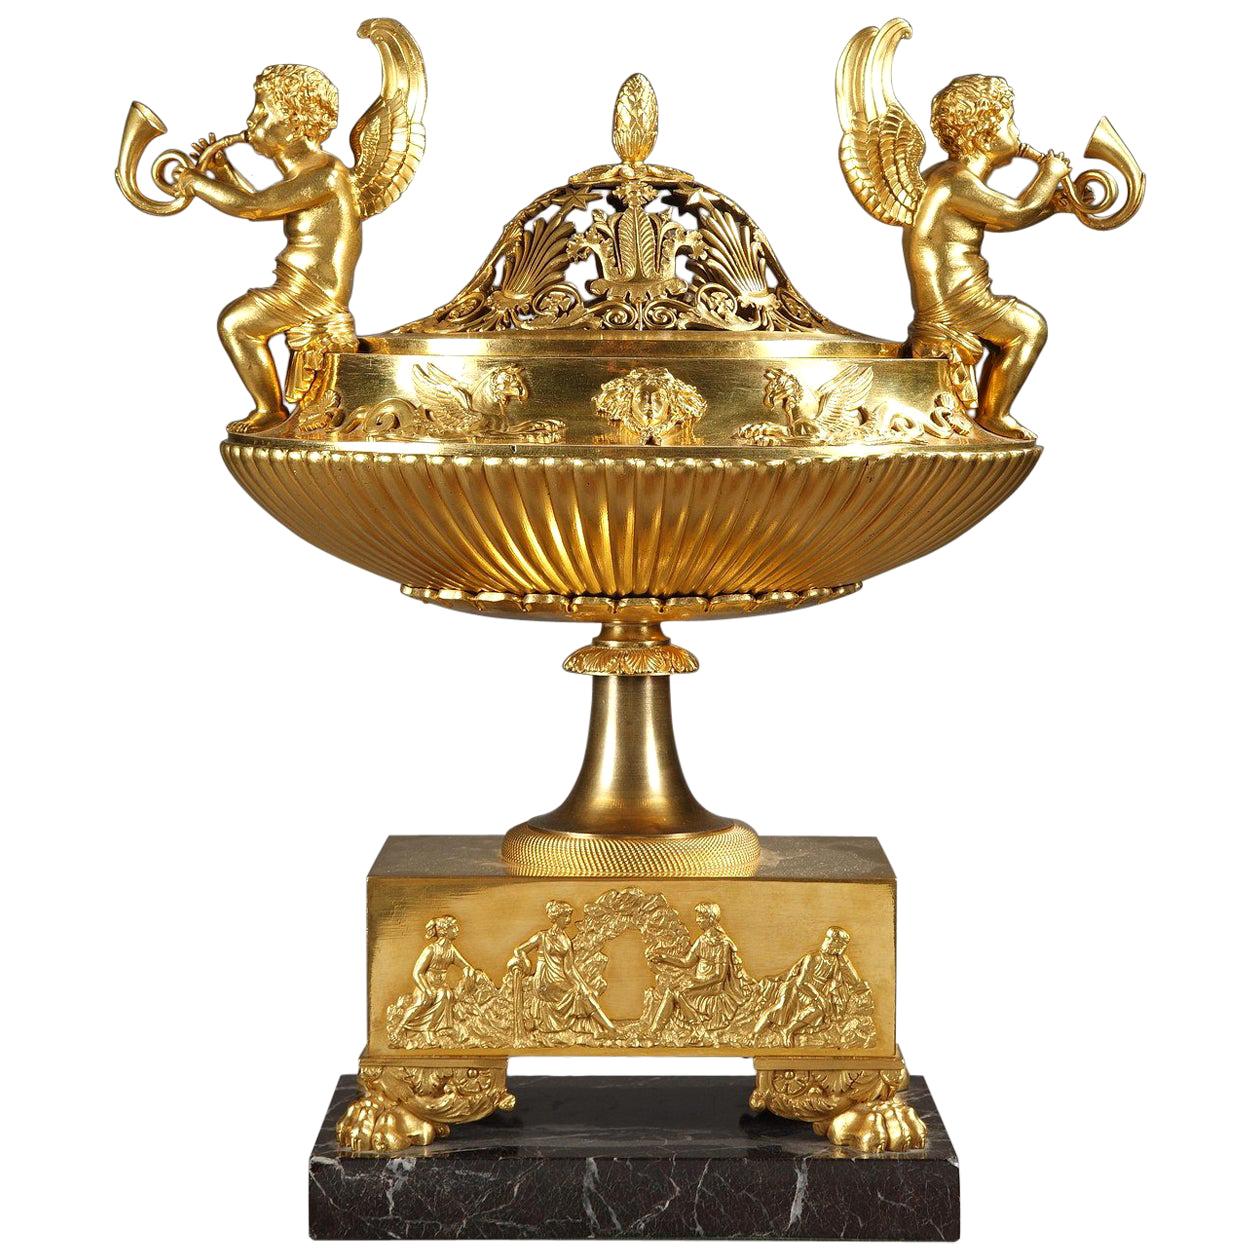 French Empire Centerpiece Perfume Burner in Gilt Bronze and Marble